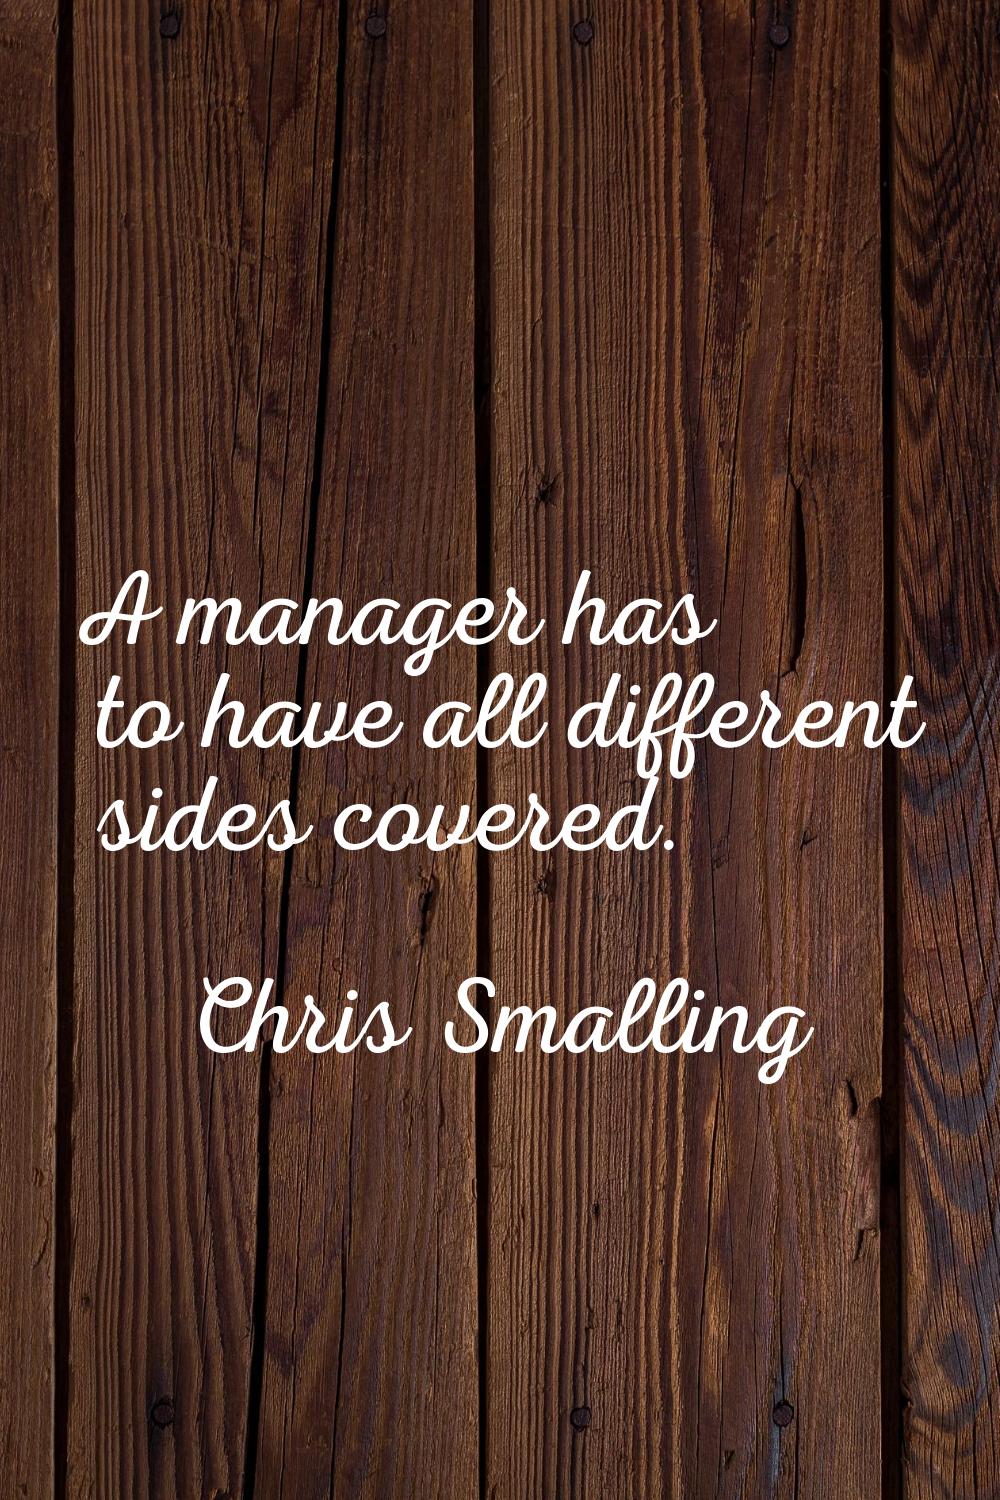 A manager has to have all different sides covered.